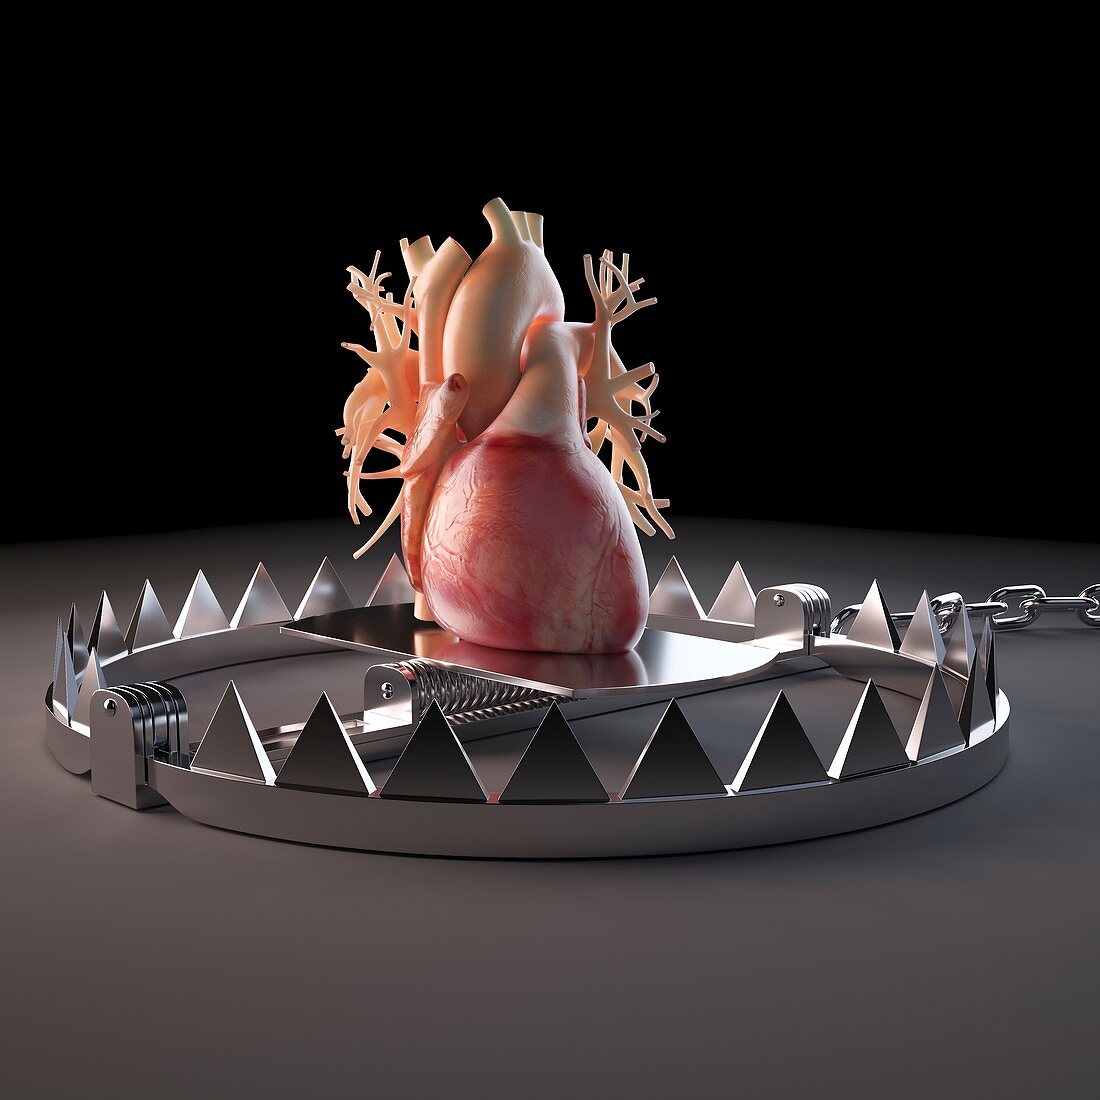 Illustration of trapped heart